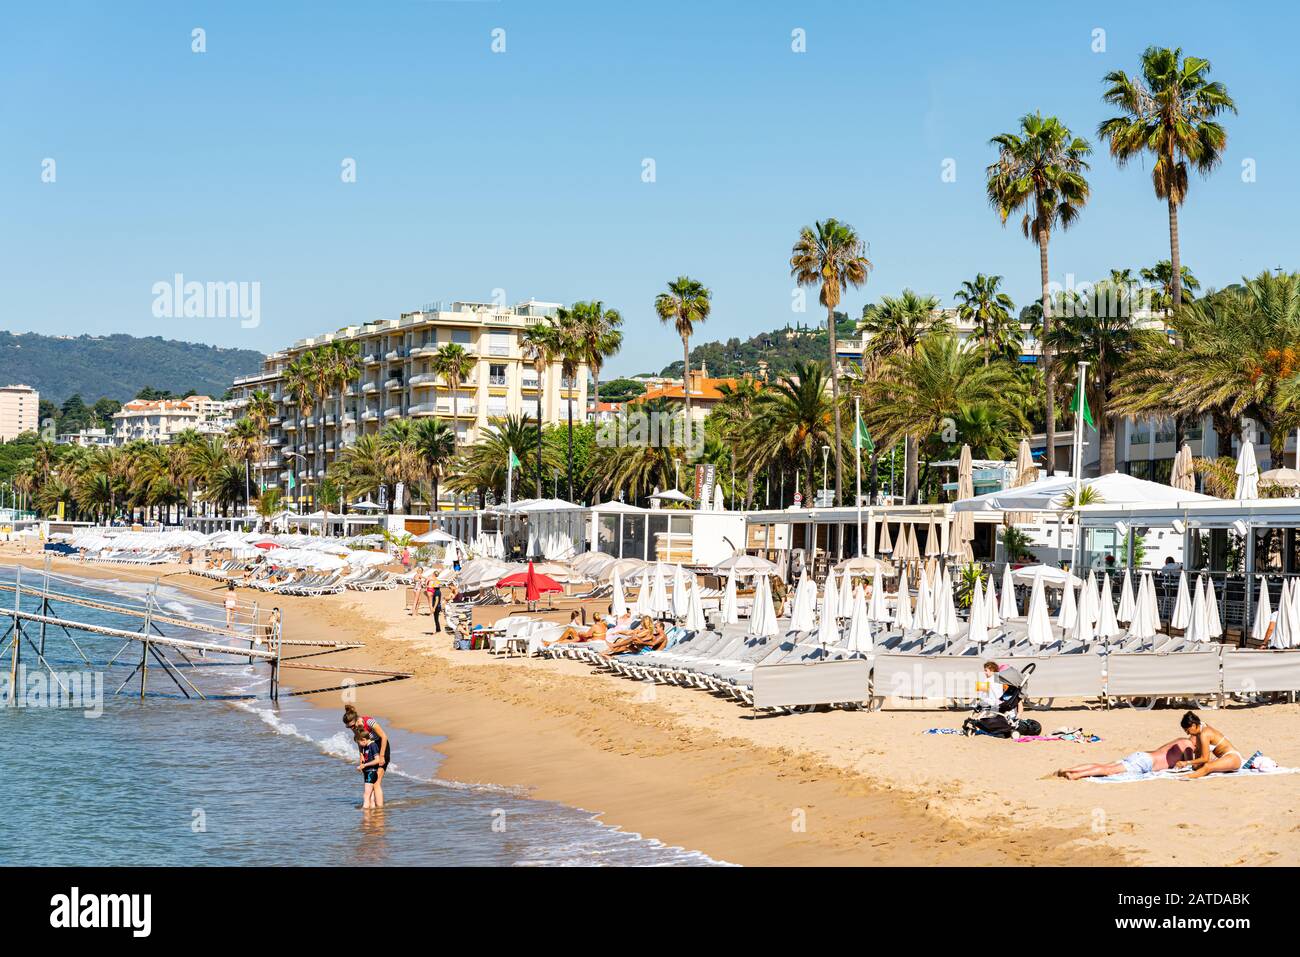 CANNES, FRANCE - JUNE 01, 2019: People Having Fun On Cannes City Beach At The Mediterranean Sea Stock Photo